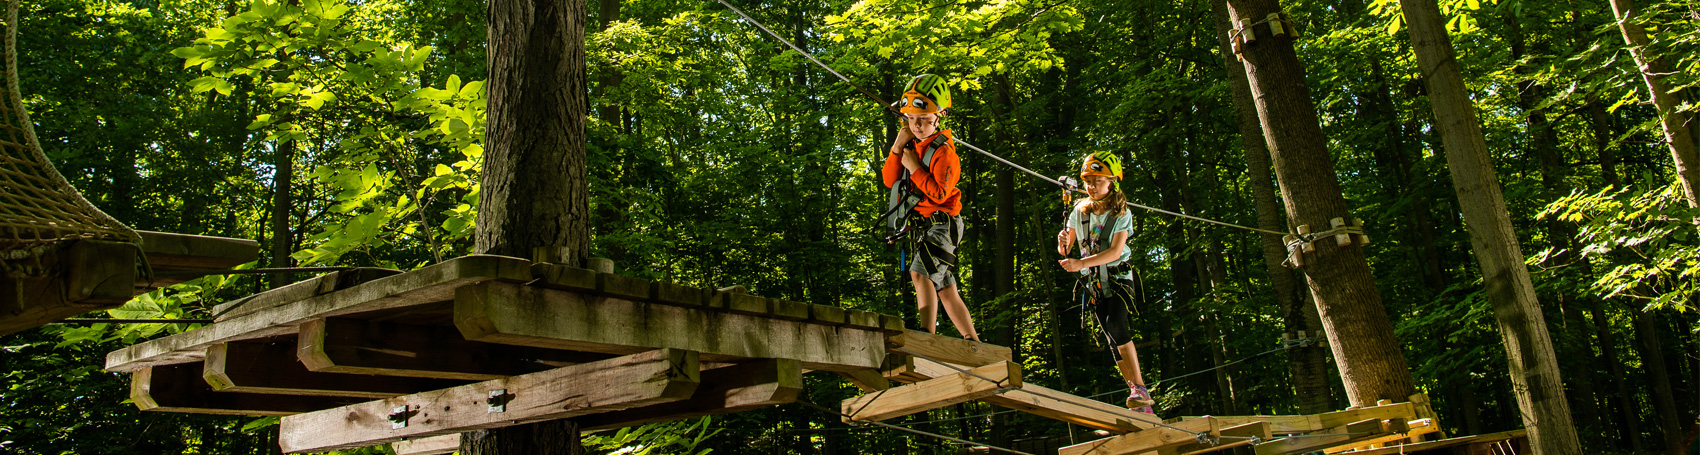 One boy and one girl on an adventure course walking on wooden planks